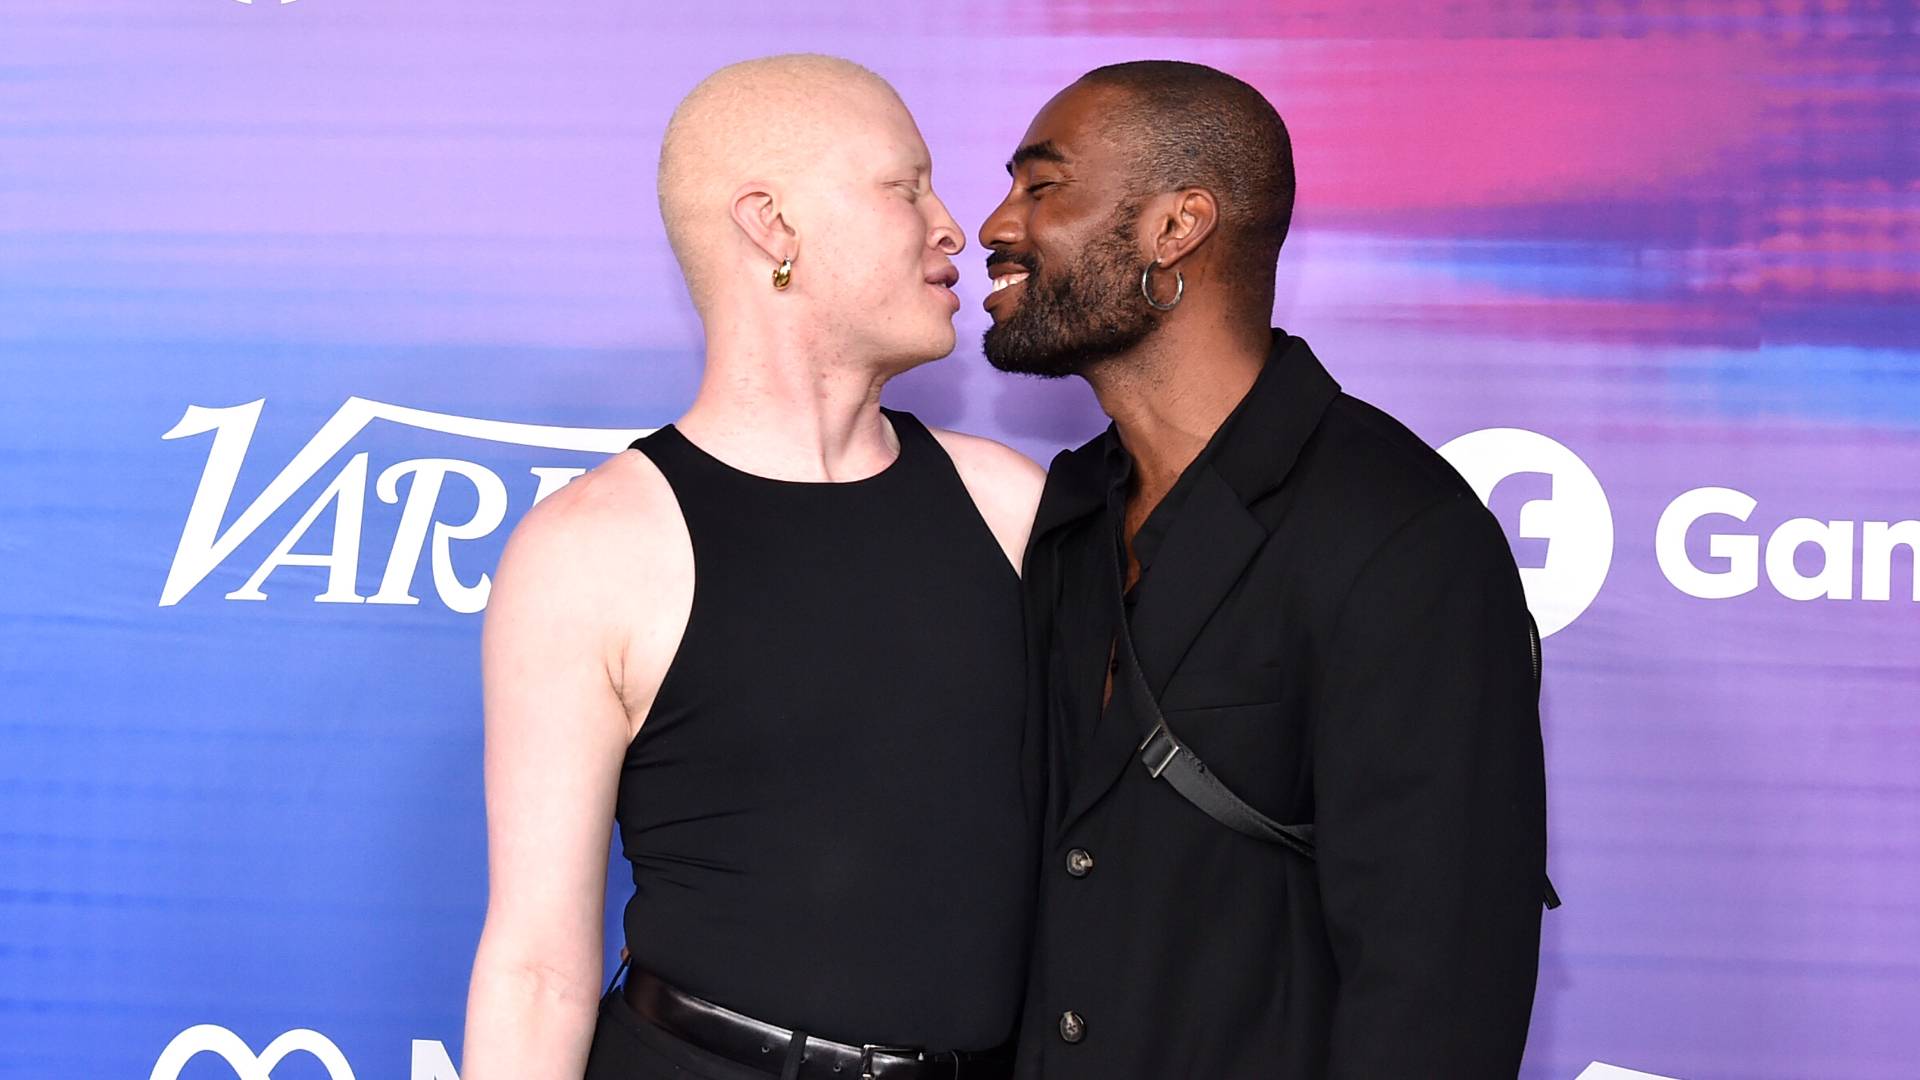 Shaun Ross and David Alan Madrick attend Variety's 2022 Power of Young Hollywood Celebration presented by Facebook Gaming on August 11, 2022 in Hollywood, California. 